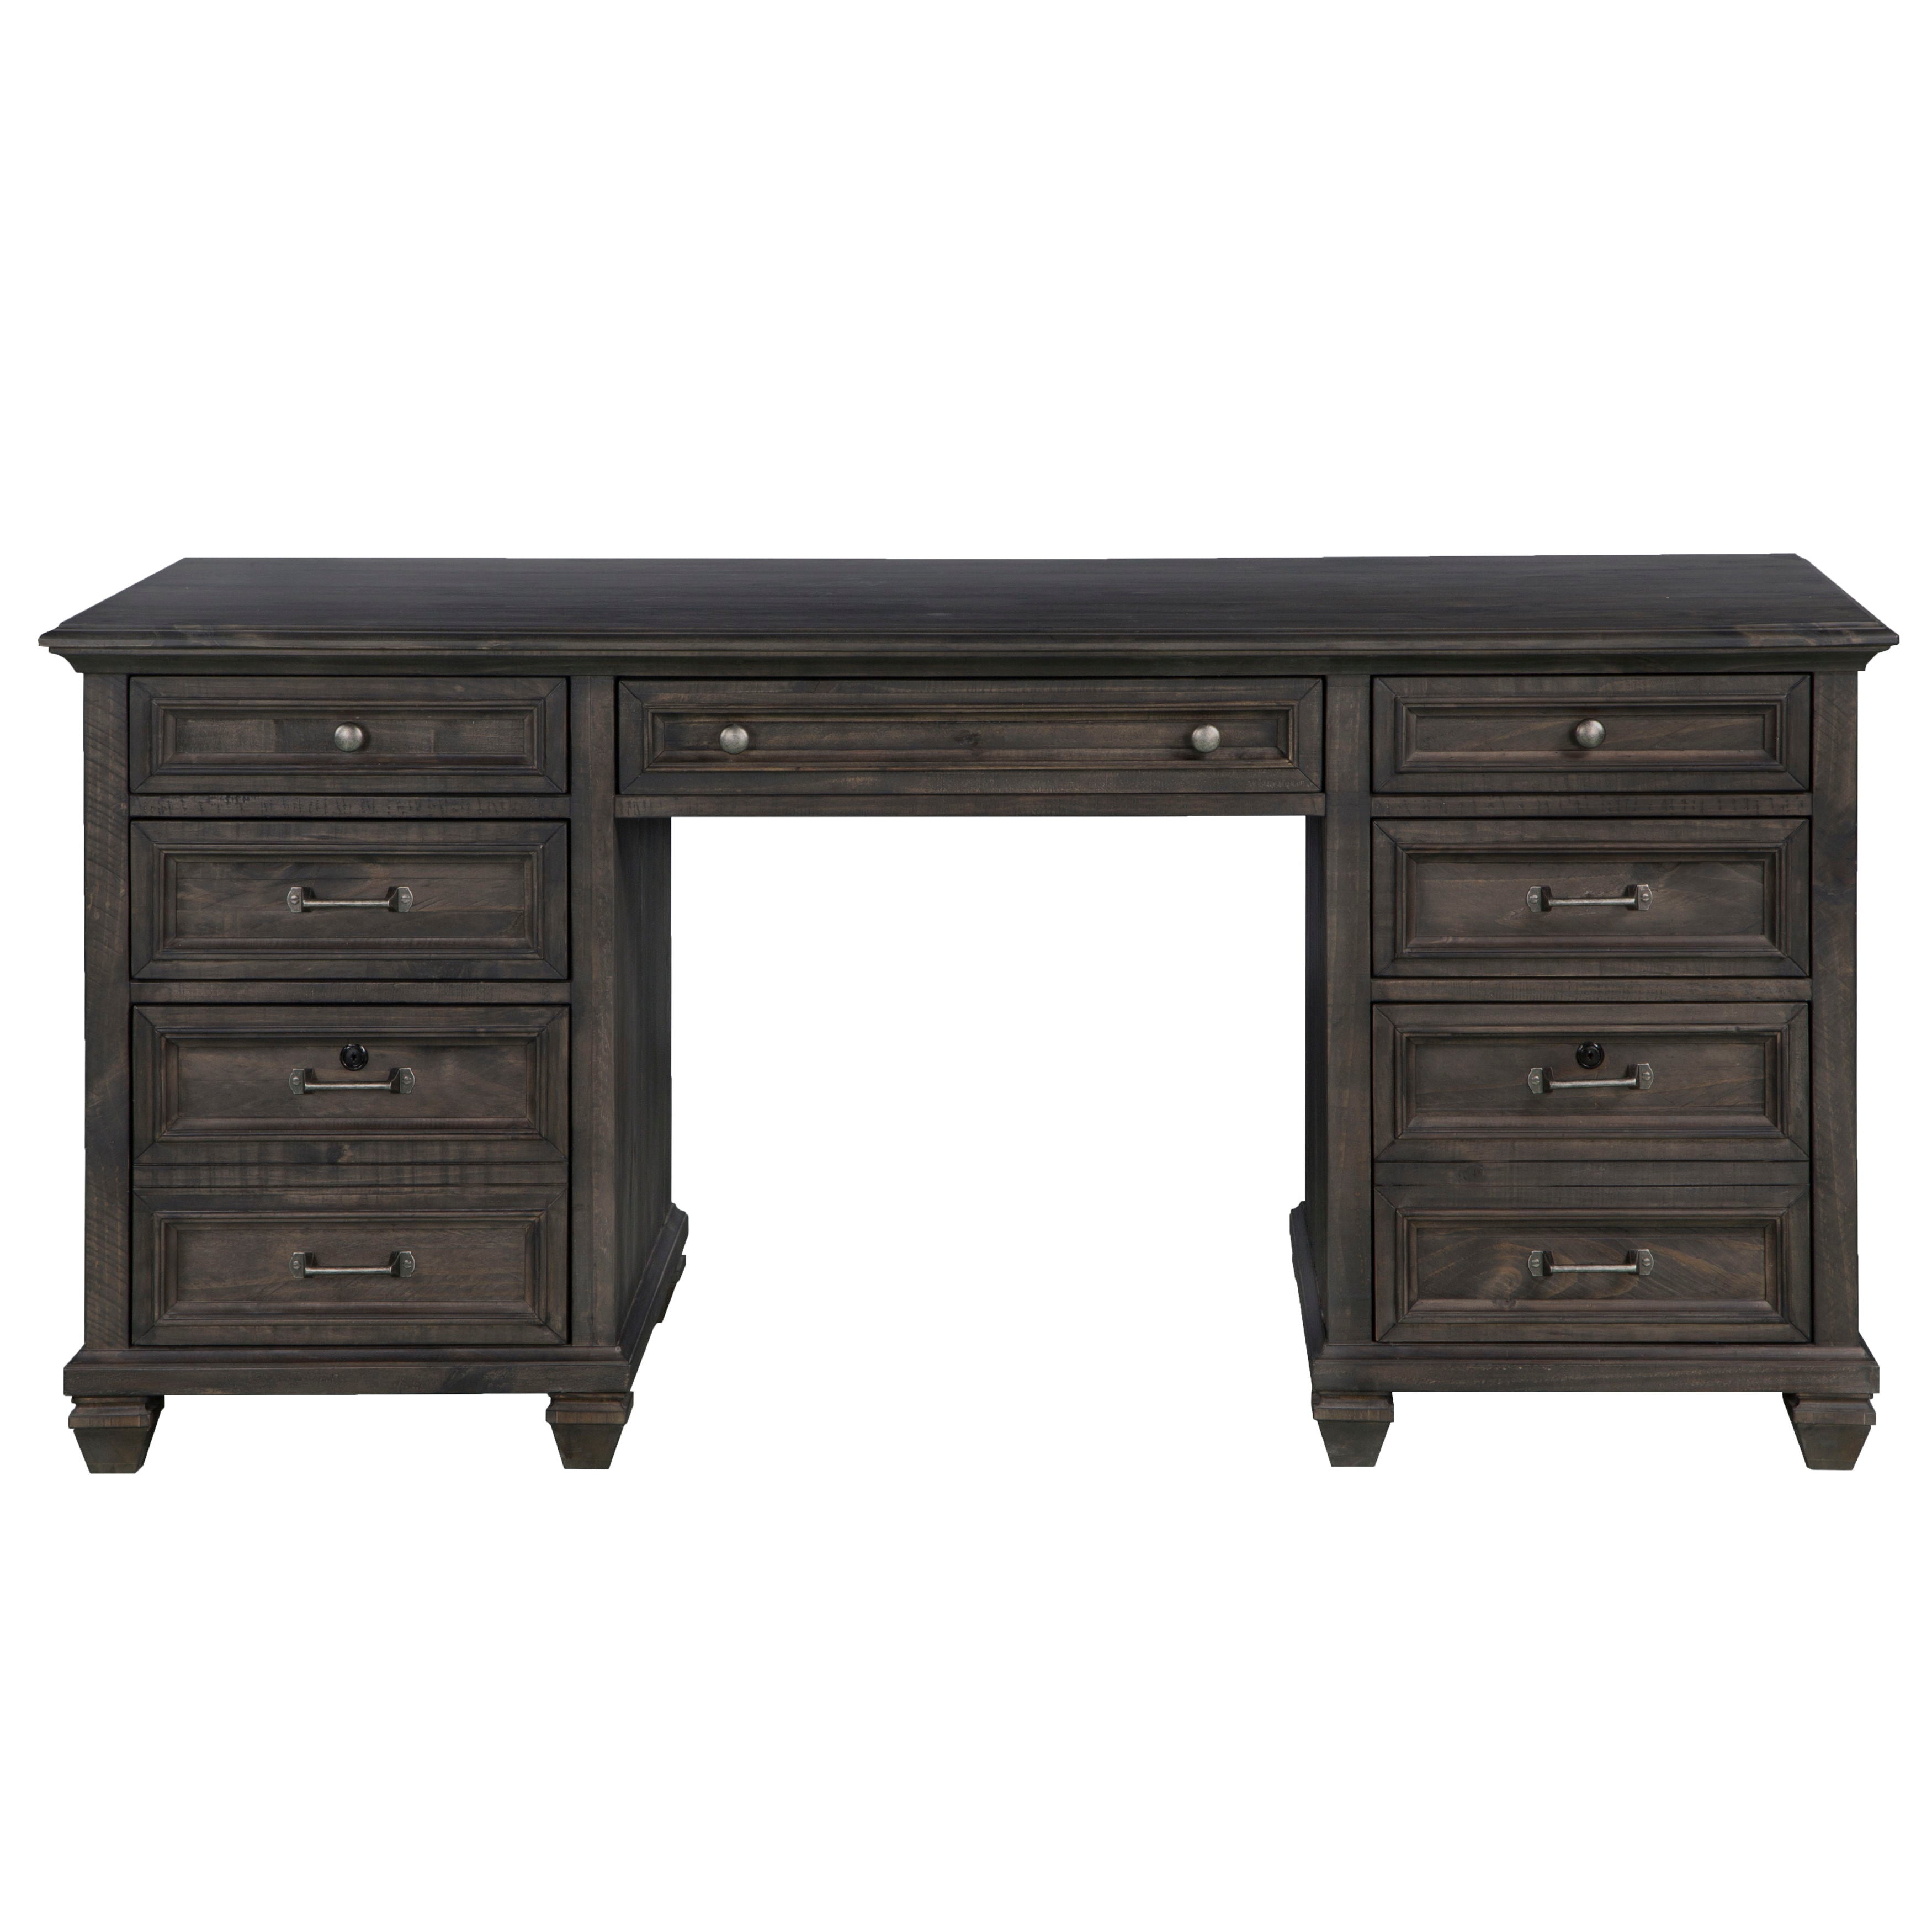 Sutton Place - Executive Desk - Weathered Charcoal